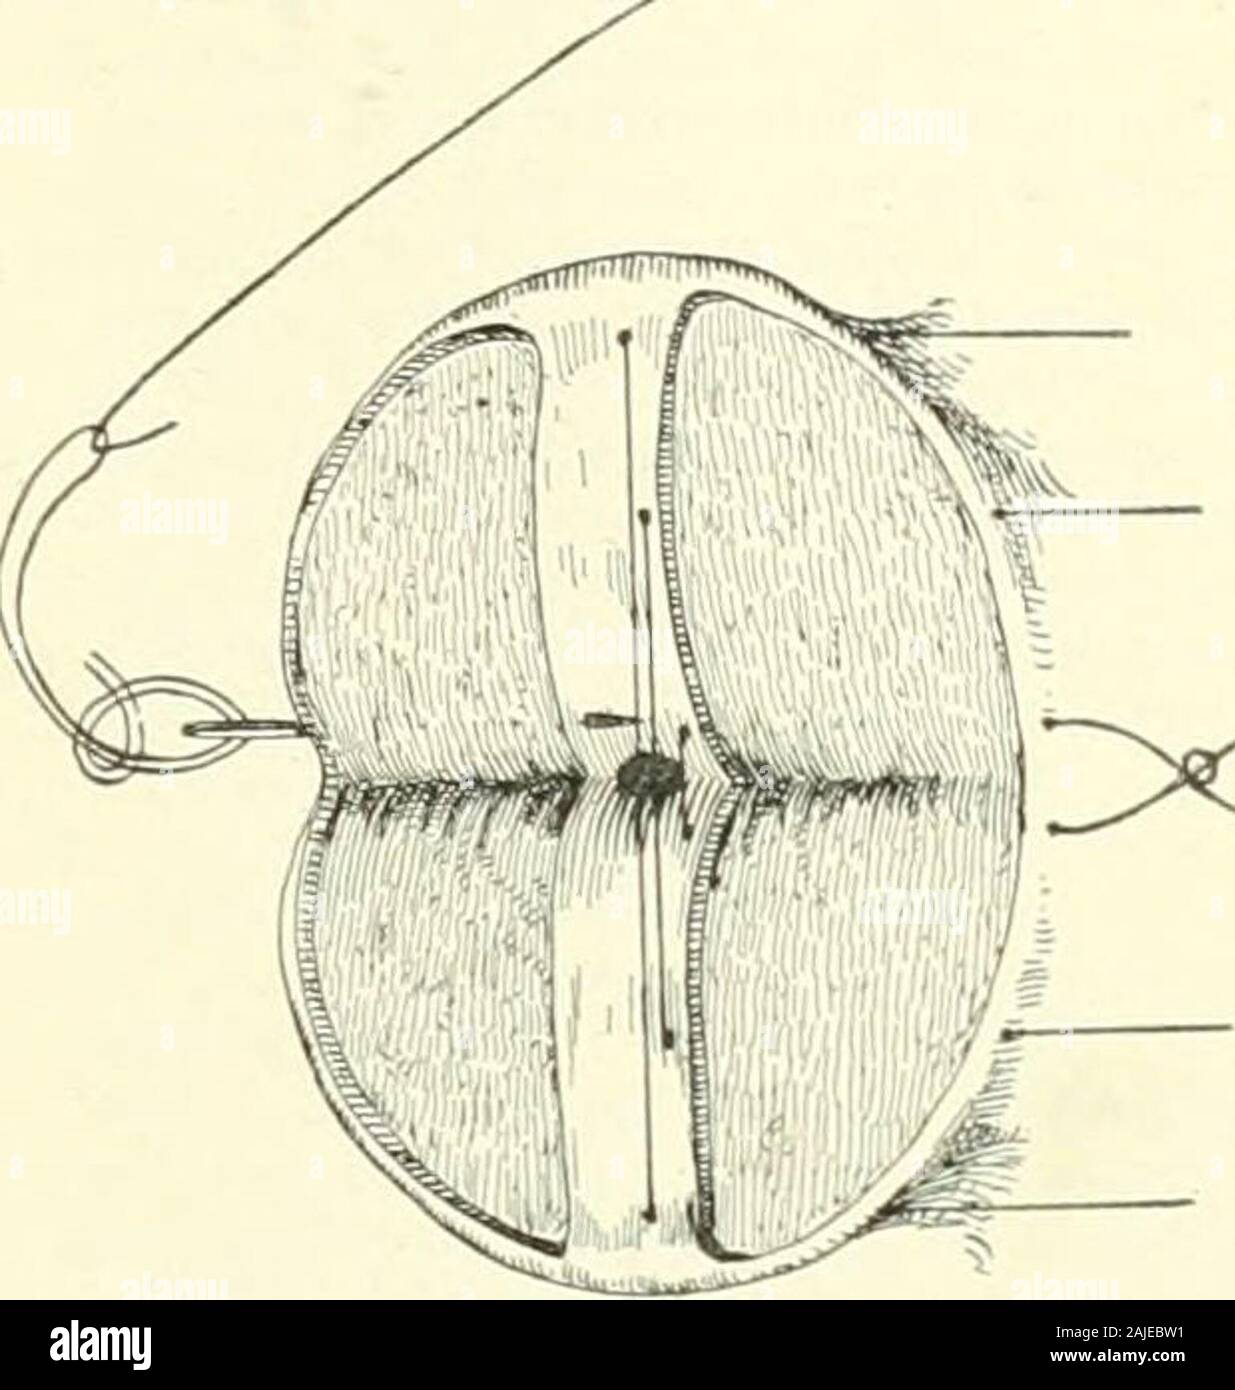 A Reference handbook of the medical sciences embracing the entire range of scientific and practical medicine and allied science . Fig. 4880.—Denuding the Cervix. the test of time and is applicable to most cases, althoughin atypical lacerations modifications must be introducedto suit the requirements. The operation is performed either in the Sims or in thelithotomy position. The bowels should be thoroughly. fi^^fr^i L---^^ Fig. 4881.—Sutures in Position. moved the day before, and on the morning of the opera-tion an enema should be given at least two hours beforethe time set for oi)eration. The Stock Photo